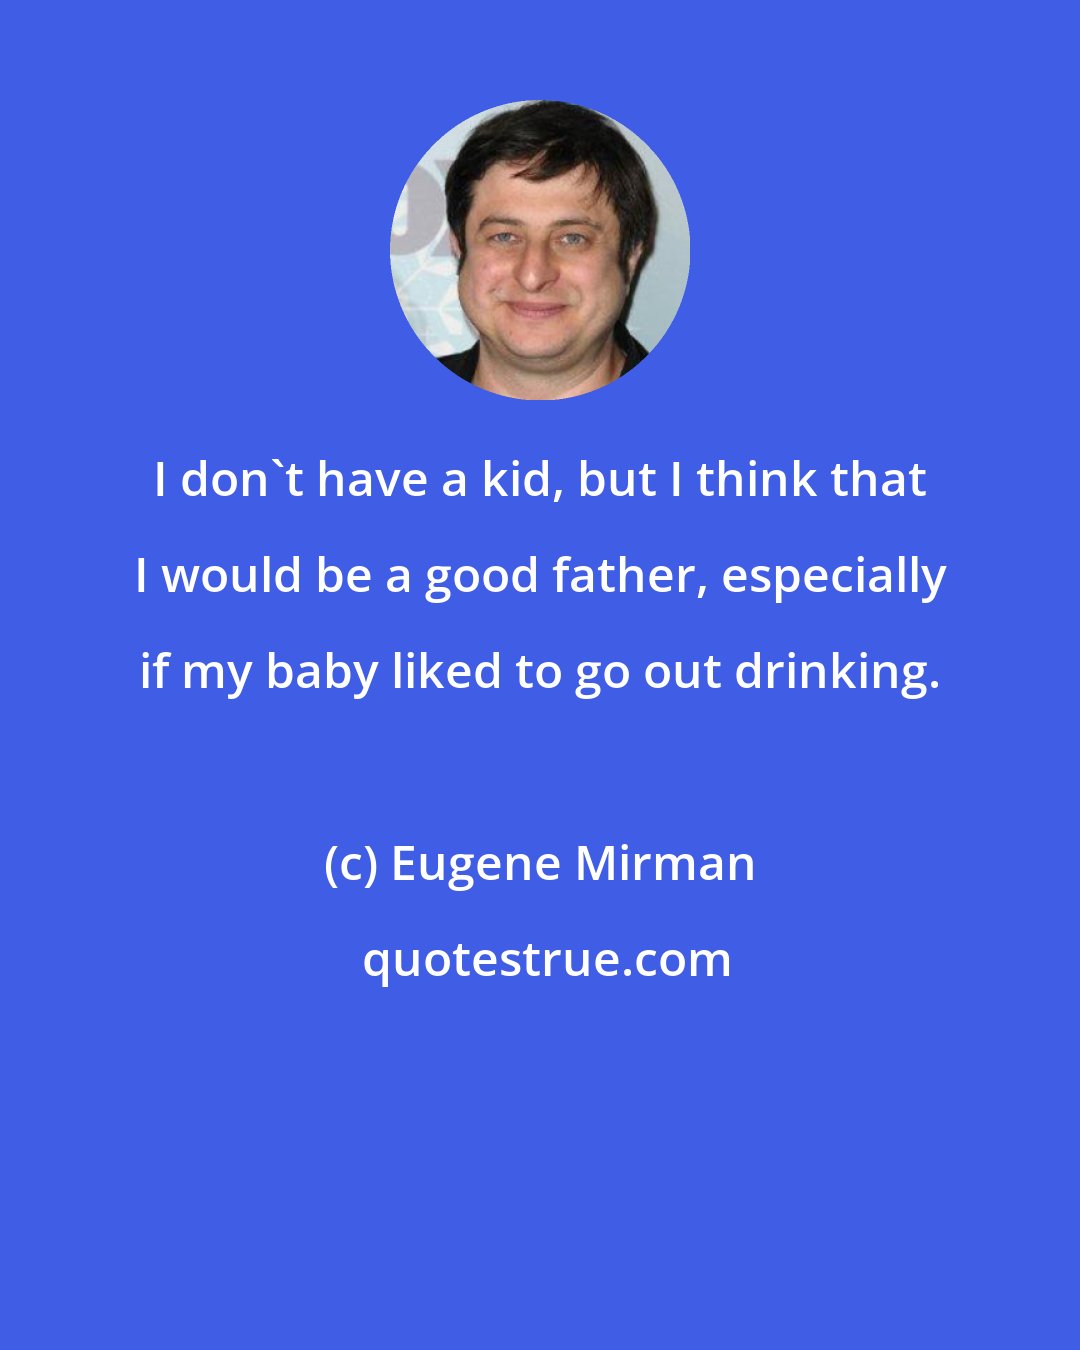 Eugene Mirman: I don't have a kid, but I think that I would be a good father, especially if my baby liked to go out drinking.